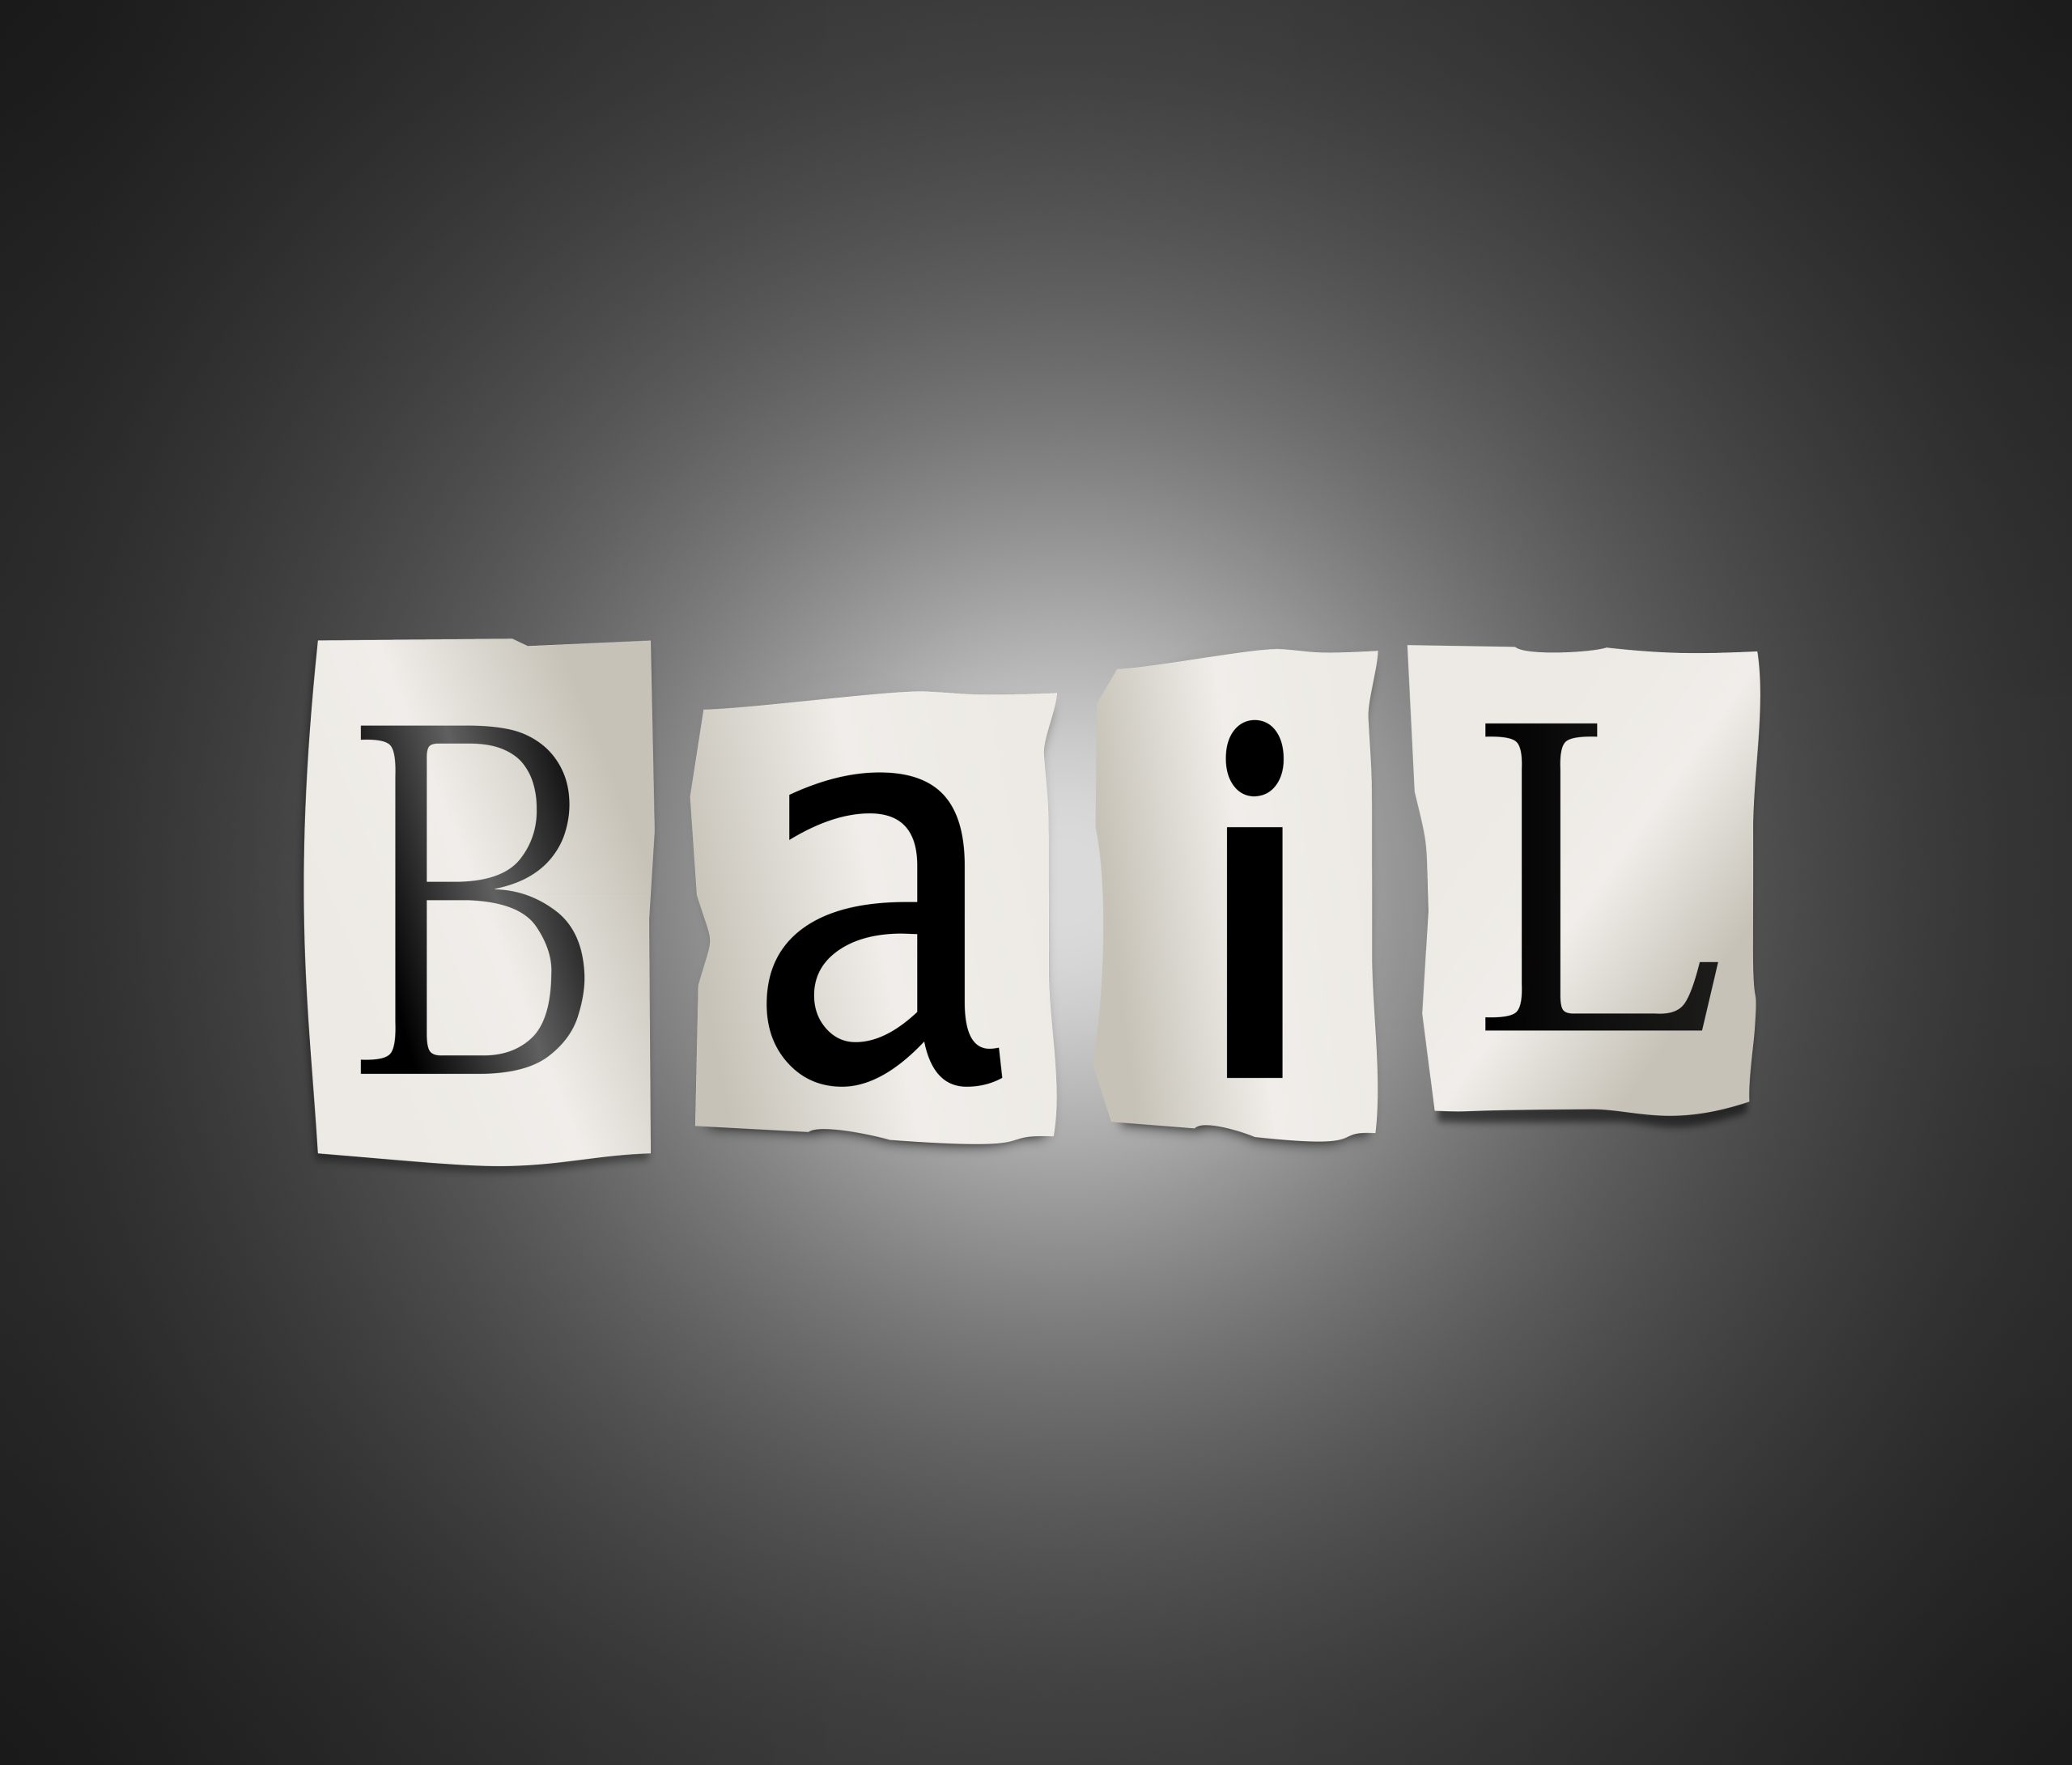 While the concept of bail goes back to England and began centuries ago, today’s modern bail system is governed in large part by Federal law and the Bail Reform Act of 1984.